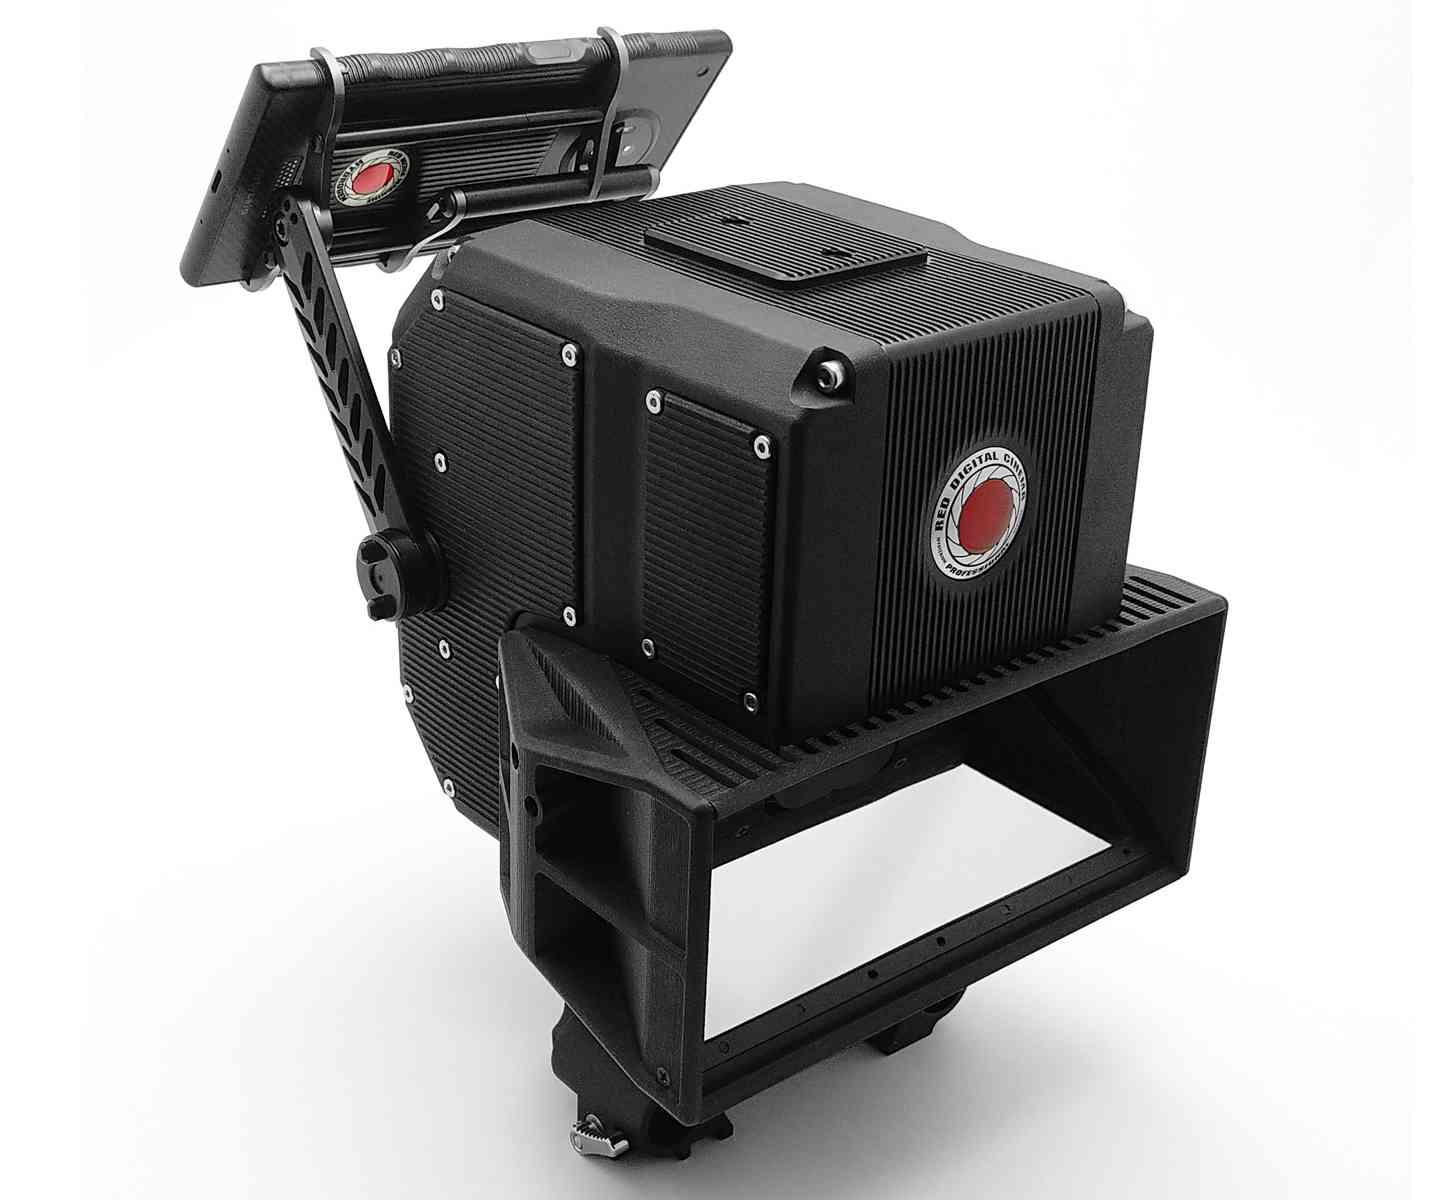 RED Lithium Hydrogen One 3D camera